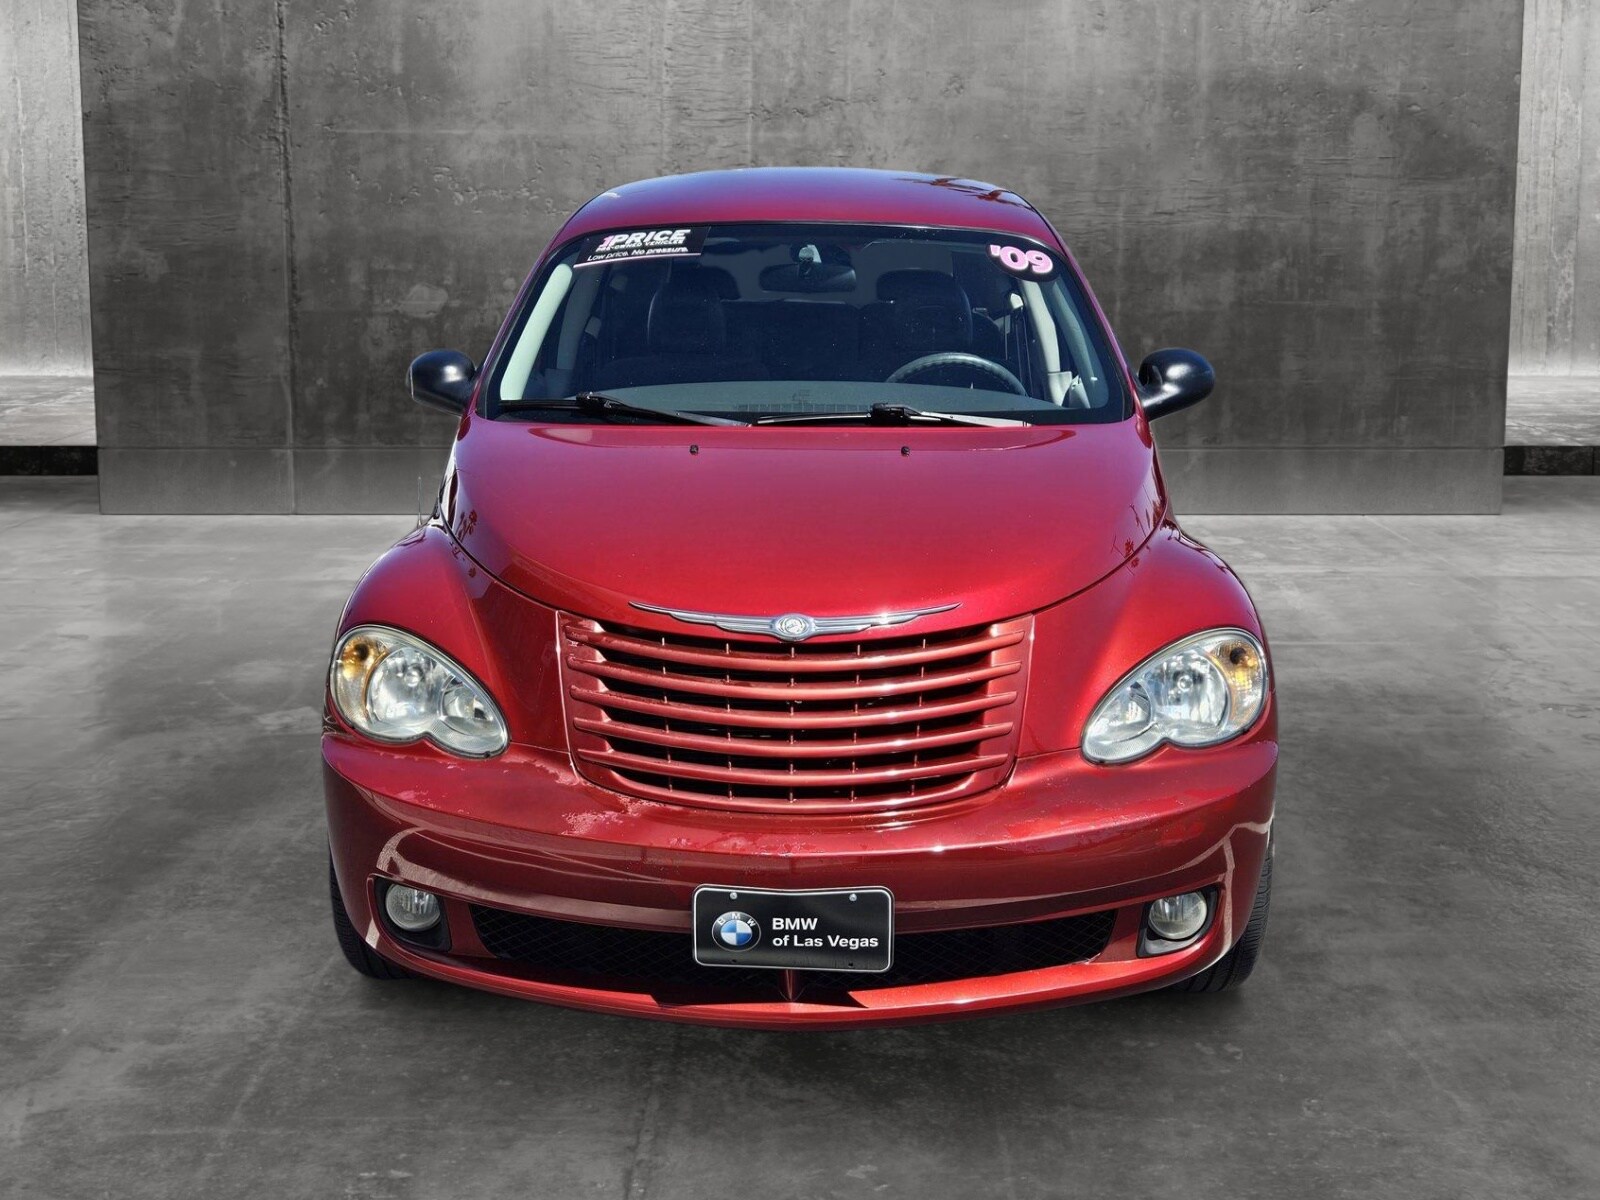 Used 2009 Chrysler PT Cruiser Touring Edition with VIN 3A8FY58959T560768 for sale in Las Vegas, NV